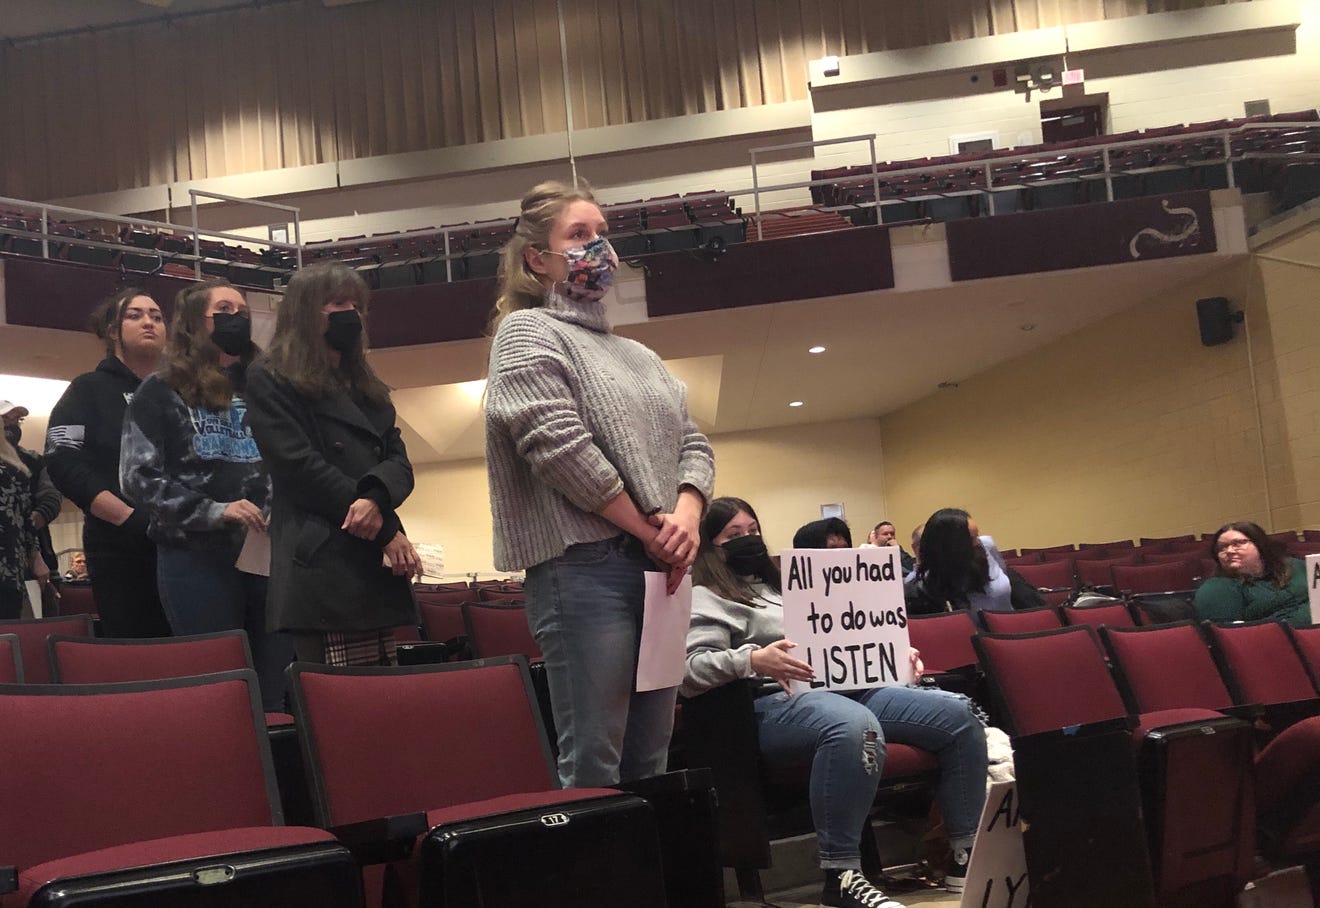 Current students, alumni, and parents line up to address the Stow-Munroe Falls Board of Education about the district's response to the Concerned Students of Stow-Munroe Falls Instagram page — courtesy of Krista S. Kano, Akron Beacon Journal.